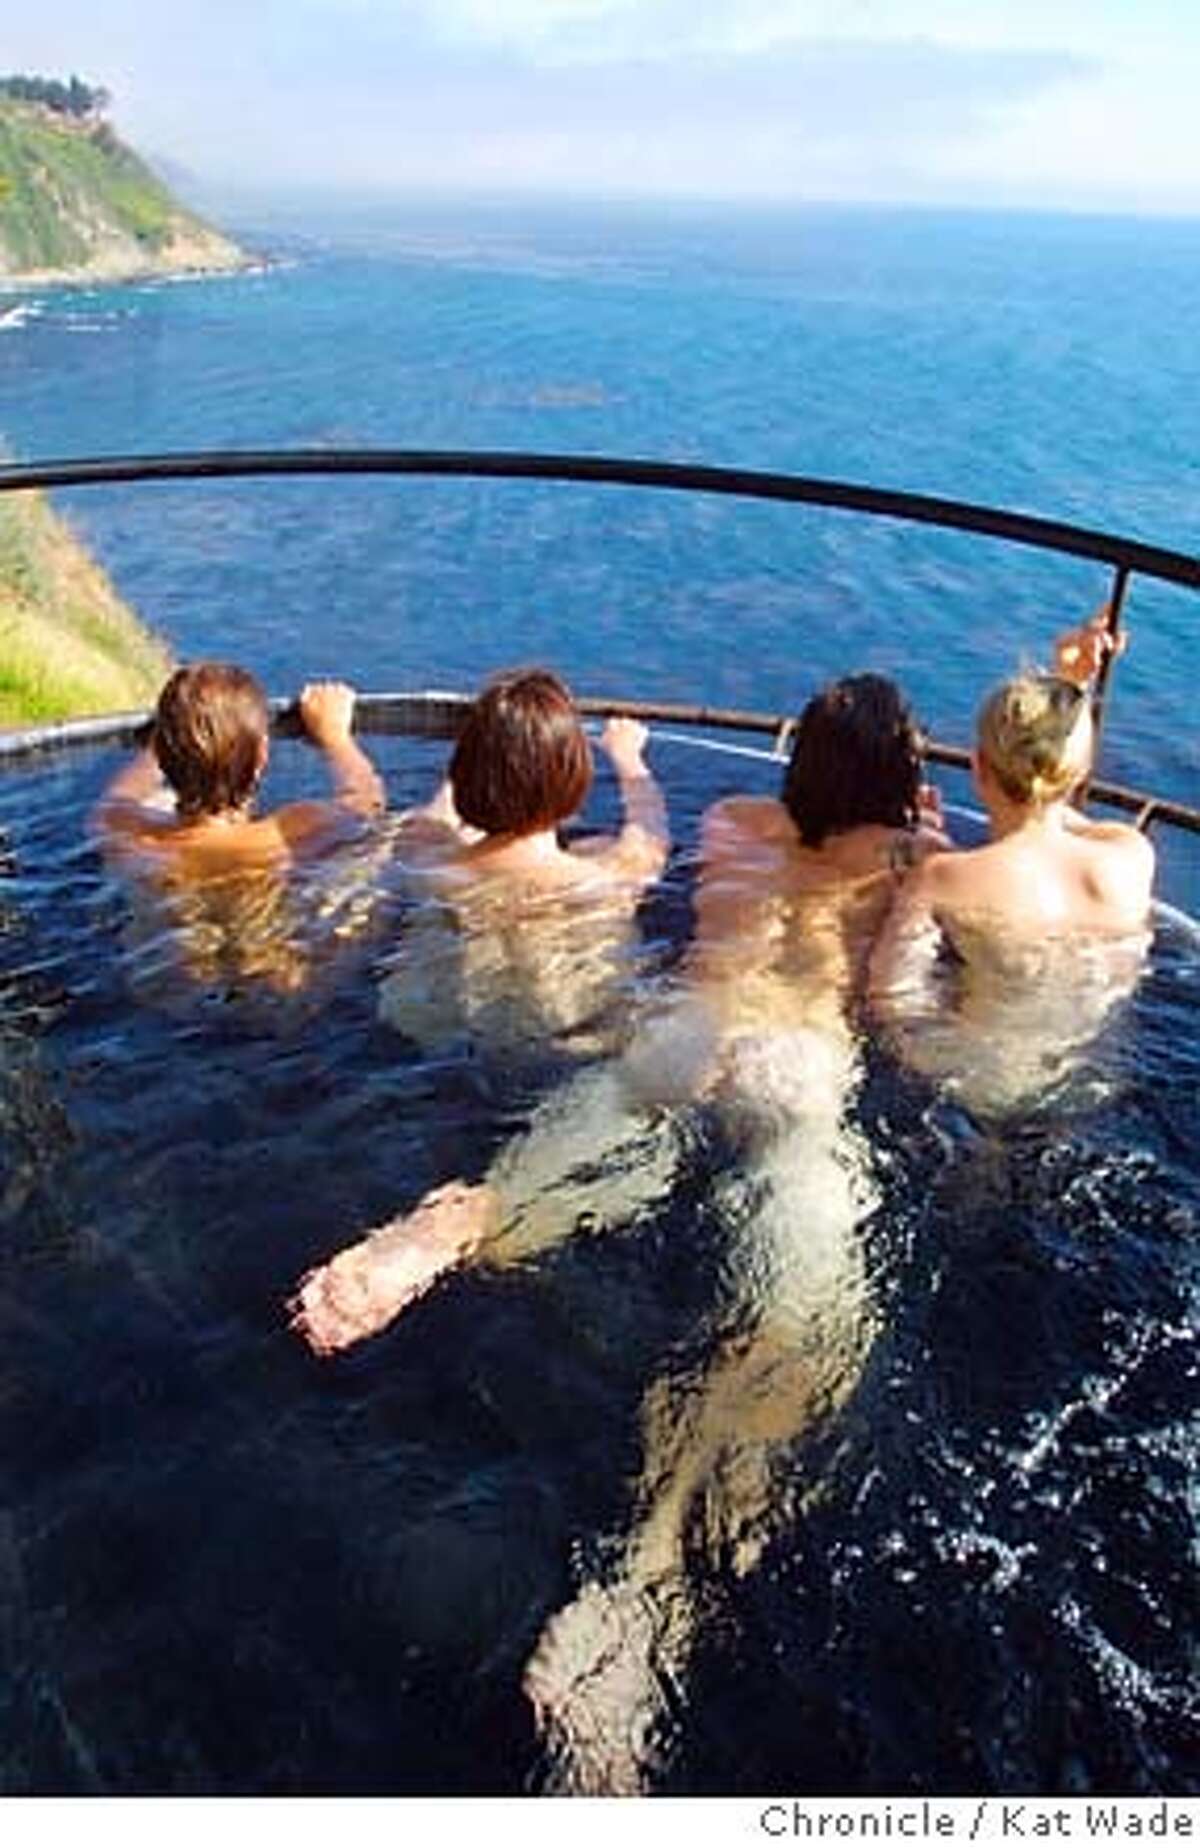 ESALENd-C-28MAY02-MT-KW - (l to r) Katrina Dunbar, Emma Dunbar, Jason McMahon and Marianna Pinchot, Esalen workers and staff, enjoy the magnificent view from the temporary hot baths that overlook the ocean at the Esalen Institute on Hwy 1 in Big Sur, California. SAN FRANCISCO CHRONICLE PHOTO BY KAT WADE Ran on: 04-15-2007 Esalen workers and staff enjoy the magnificent view from temporary hot springs baths overlooking the ocean.